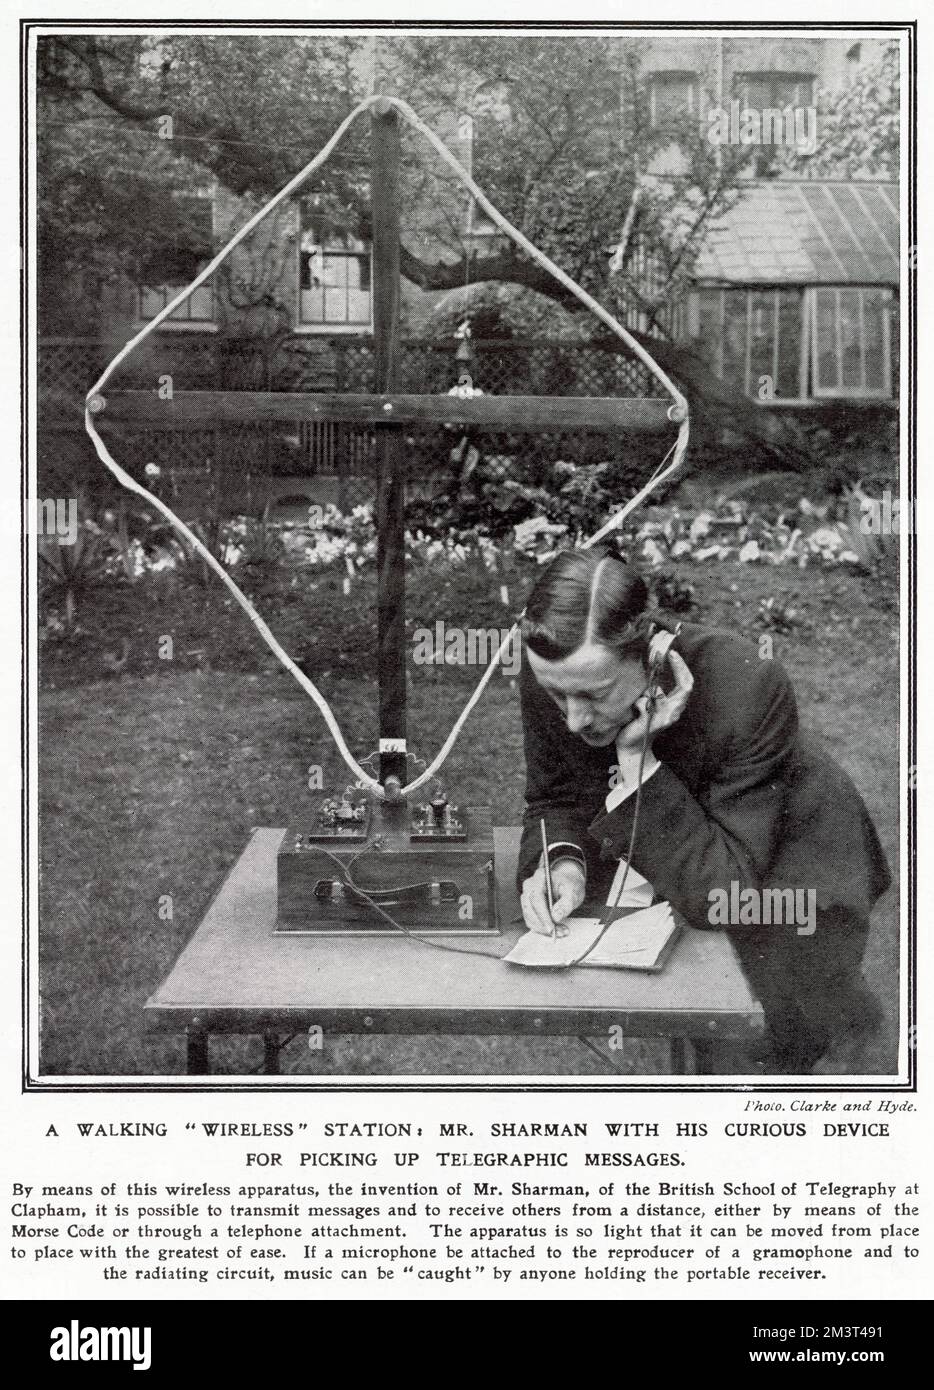 The light apparatus could be moved from place to place with ease, receiving a message outside from a distance, either by means of the morse code or through telephone attachment.      Date: 1910 Stock Photo